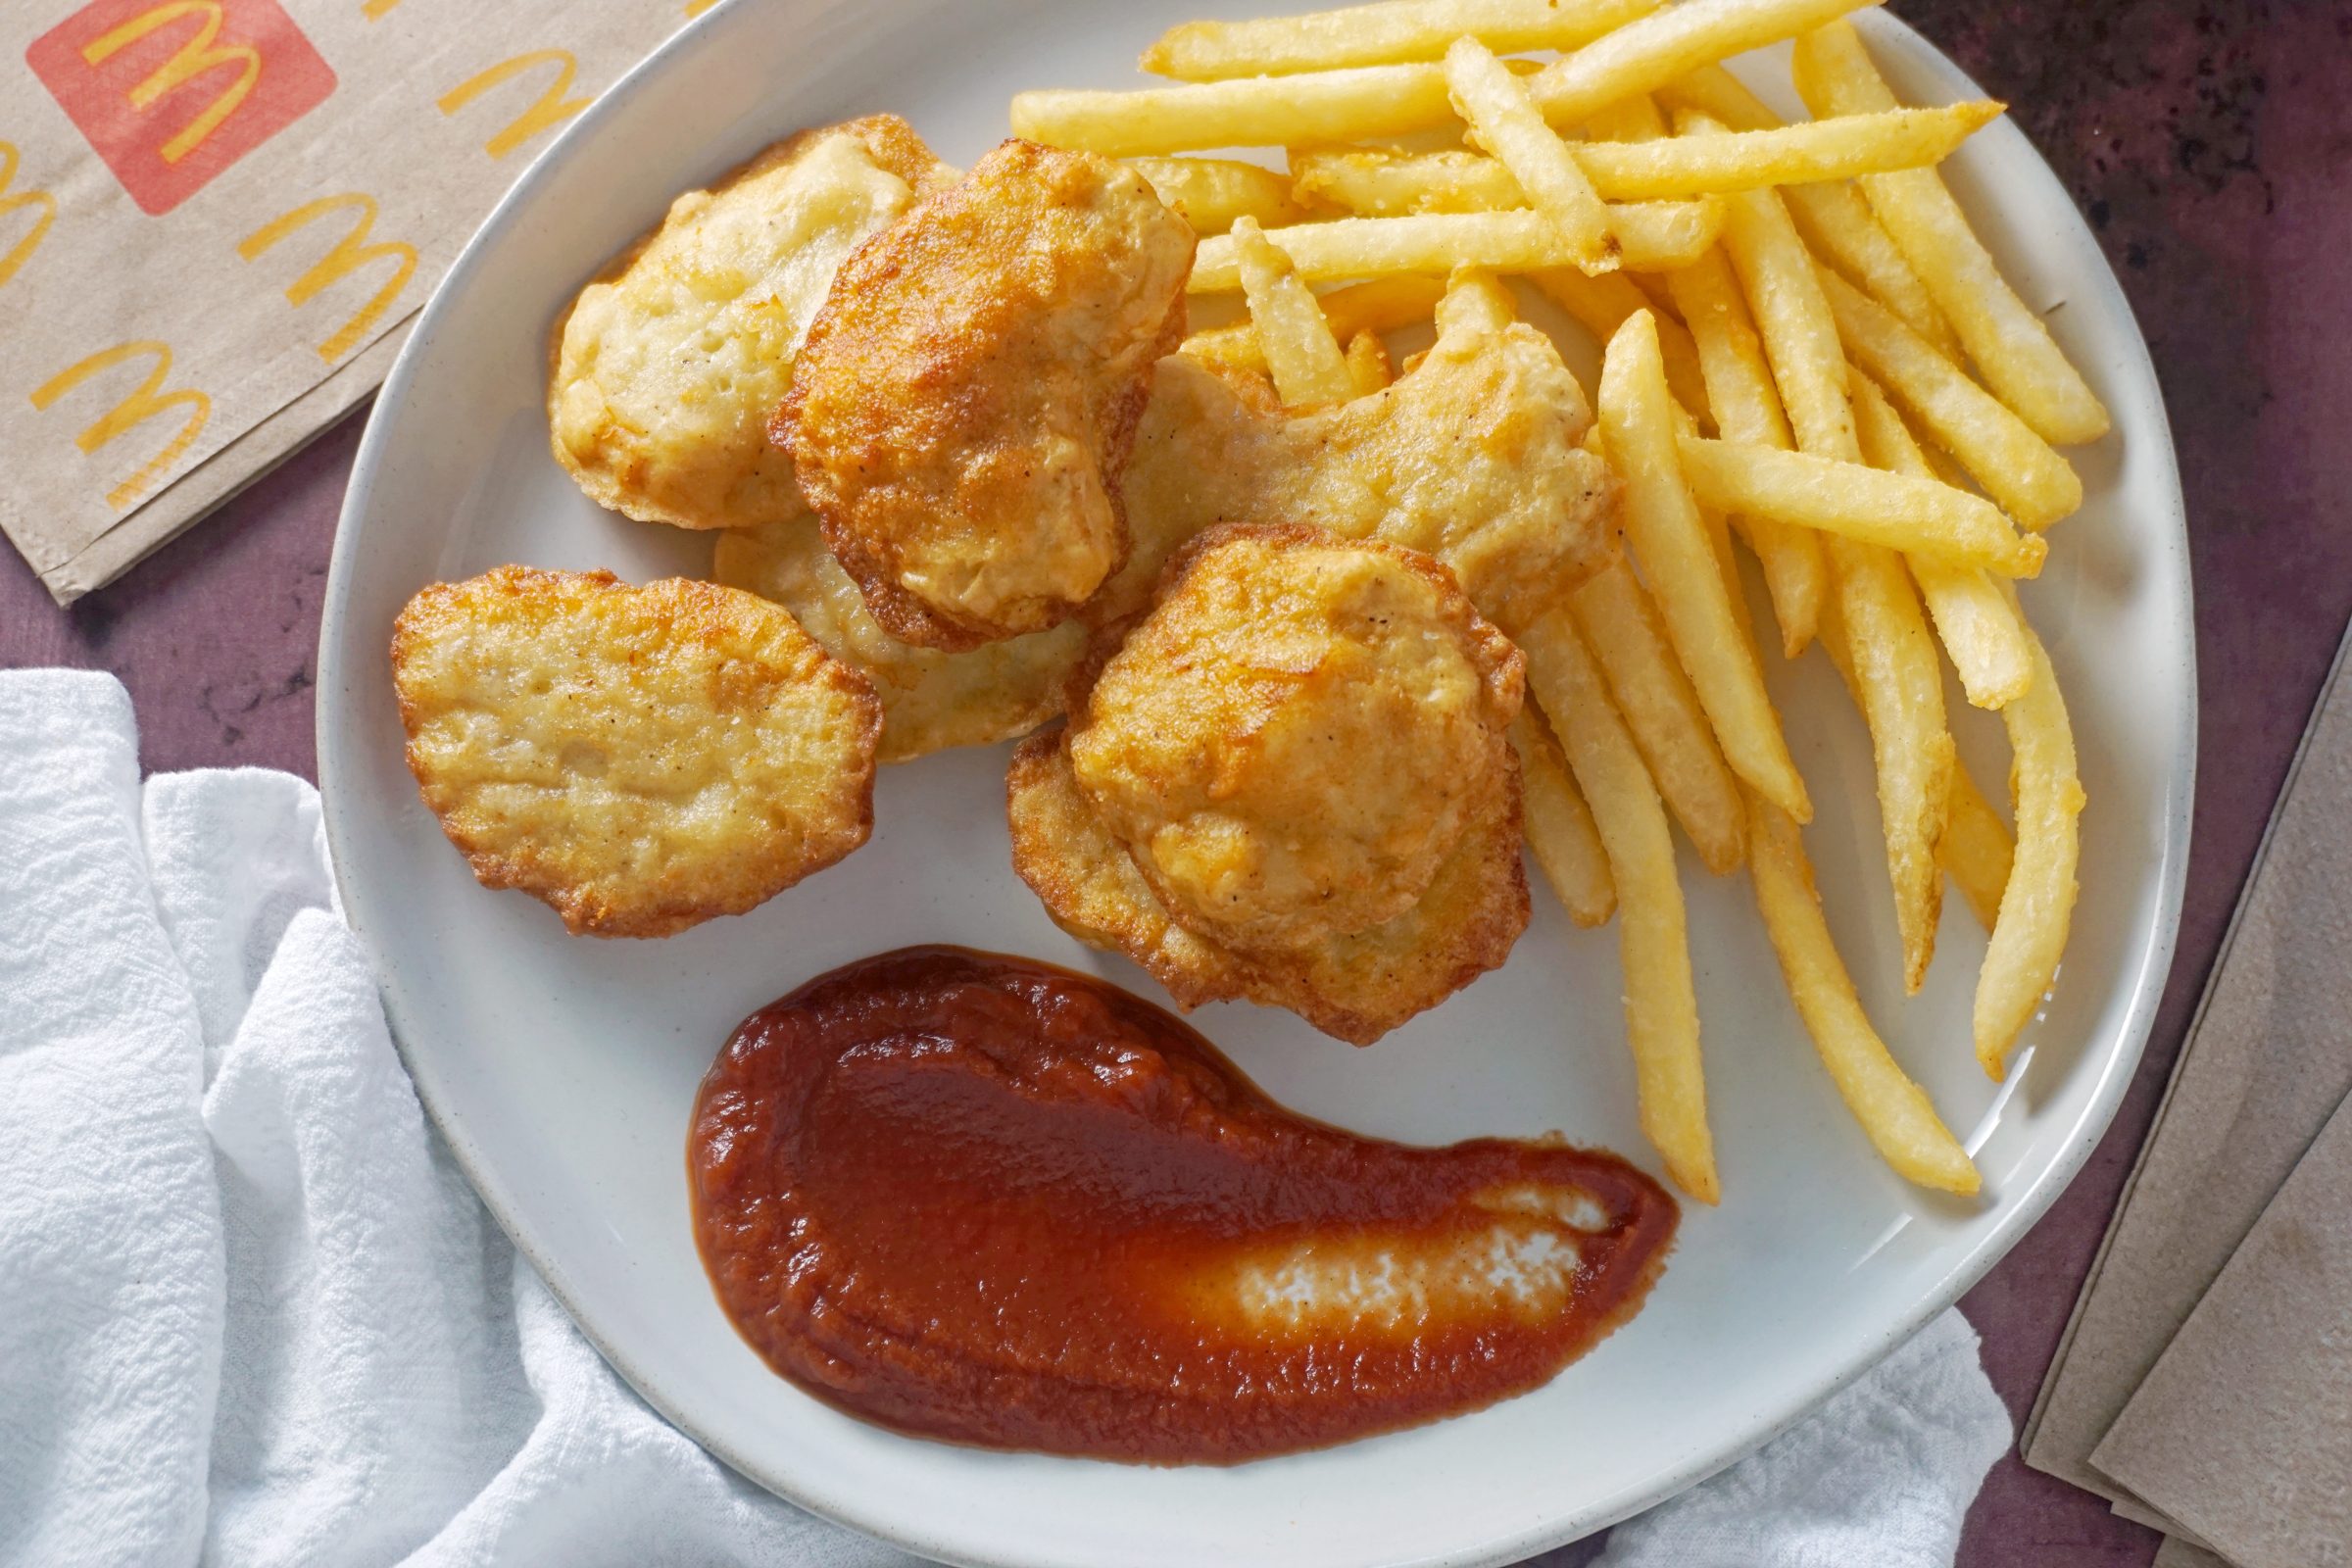 copy cat McDonalds chicken nuggets on a plate with ketchup and fries